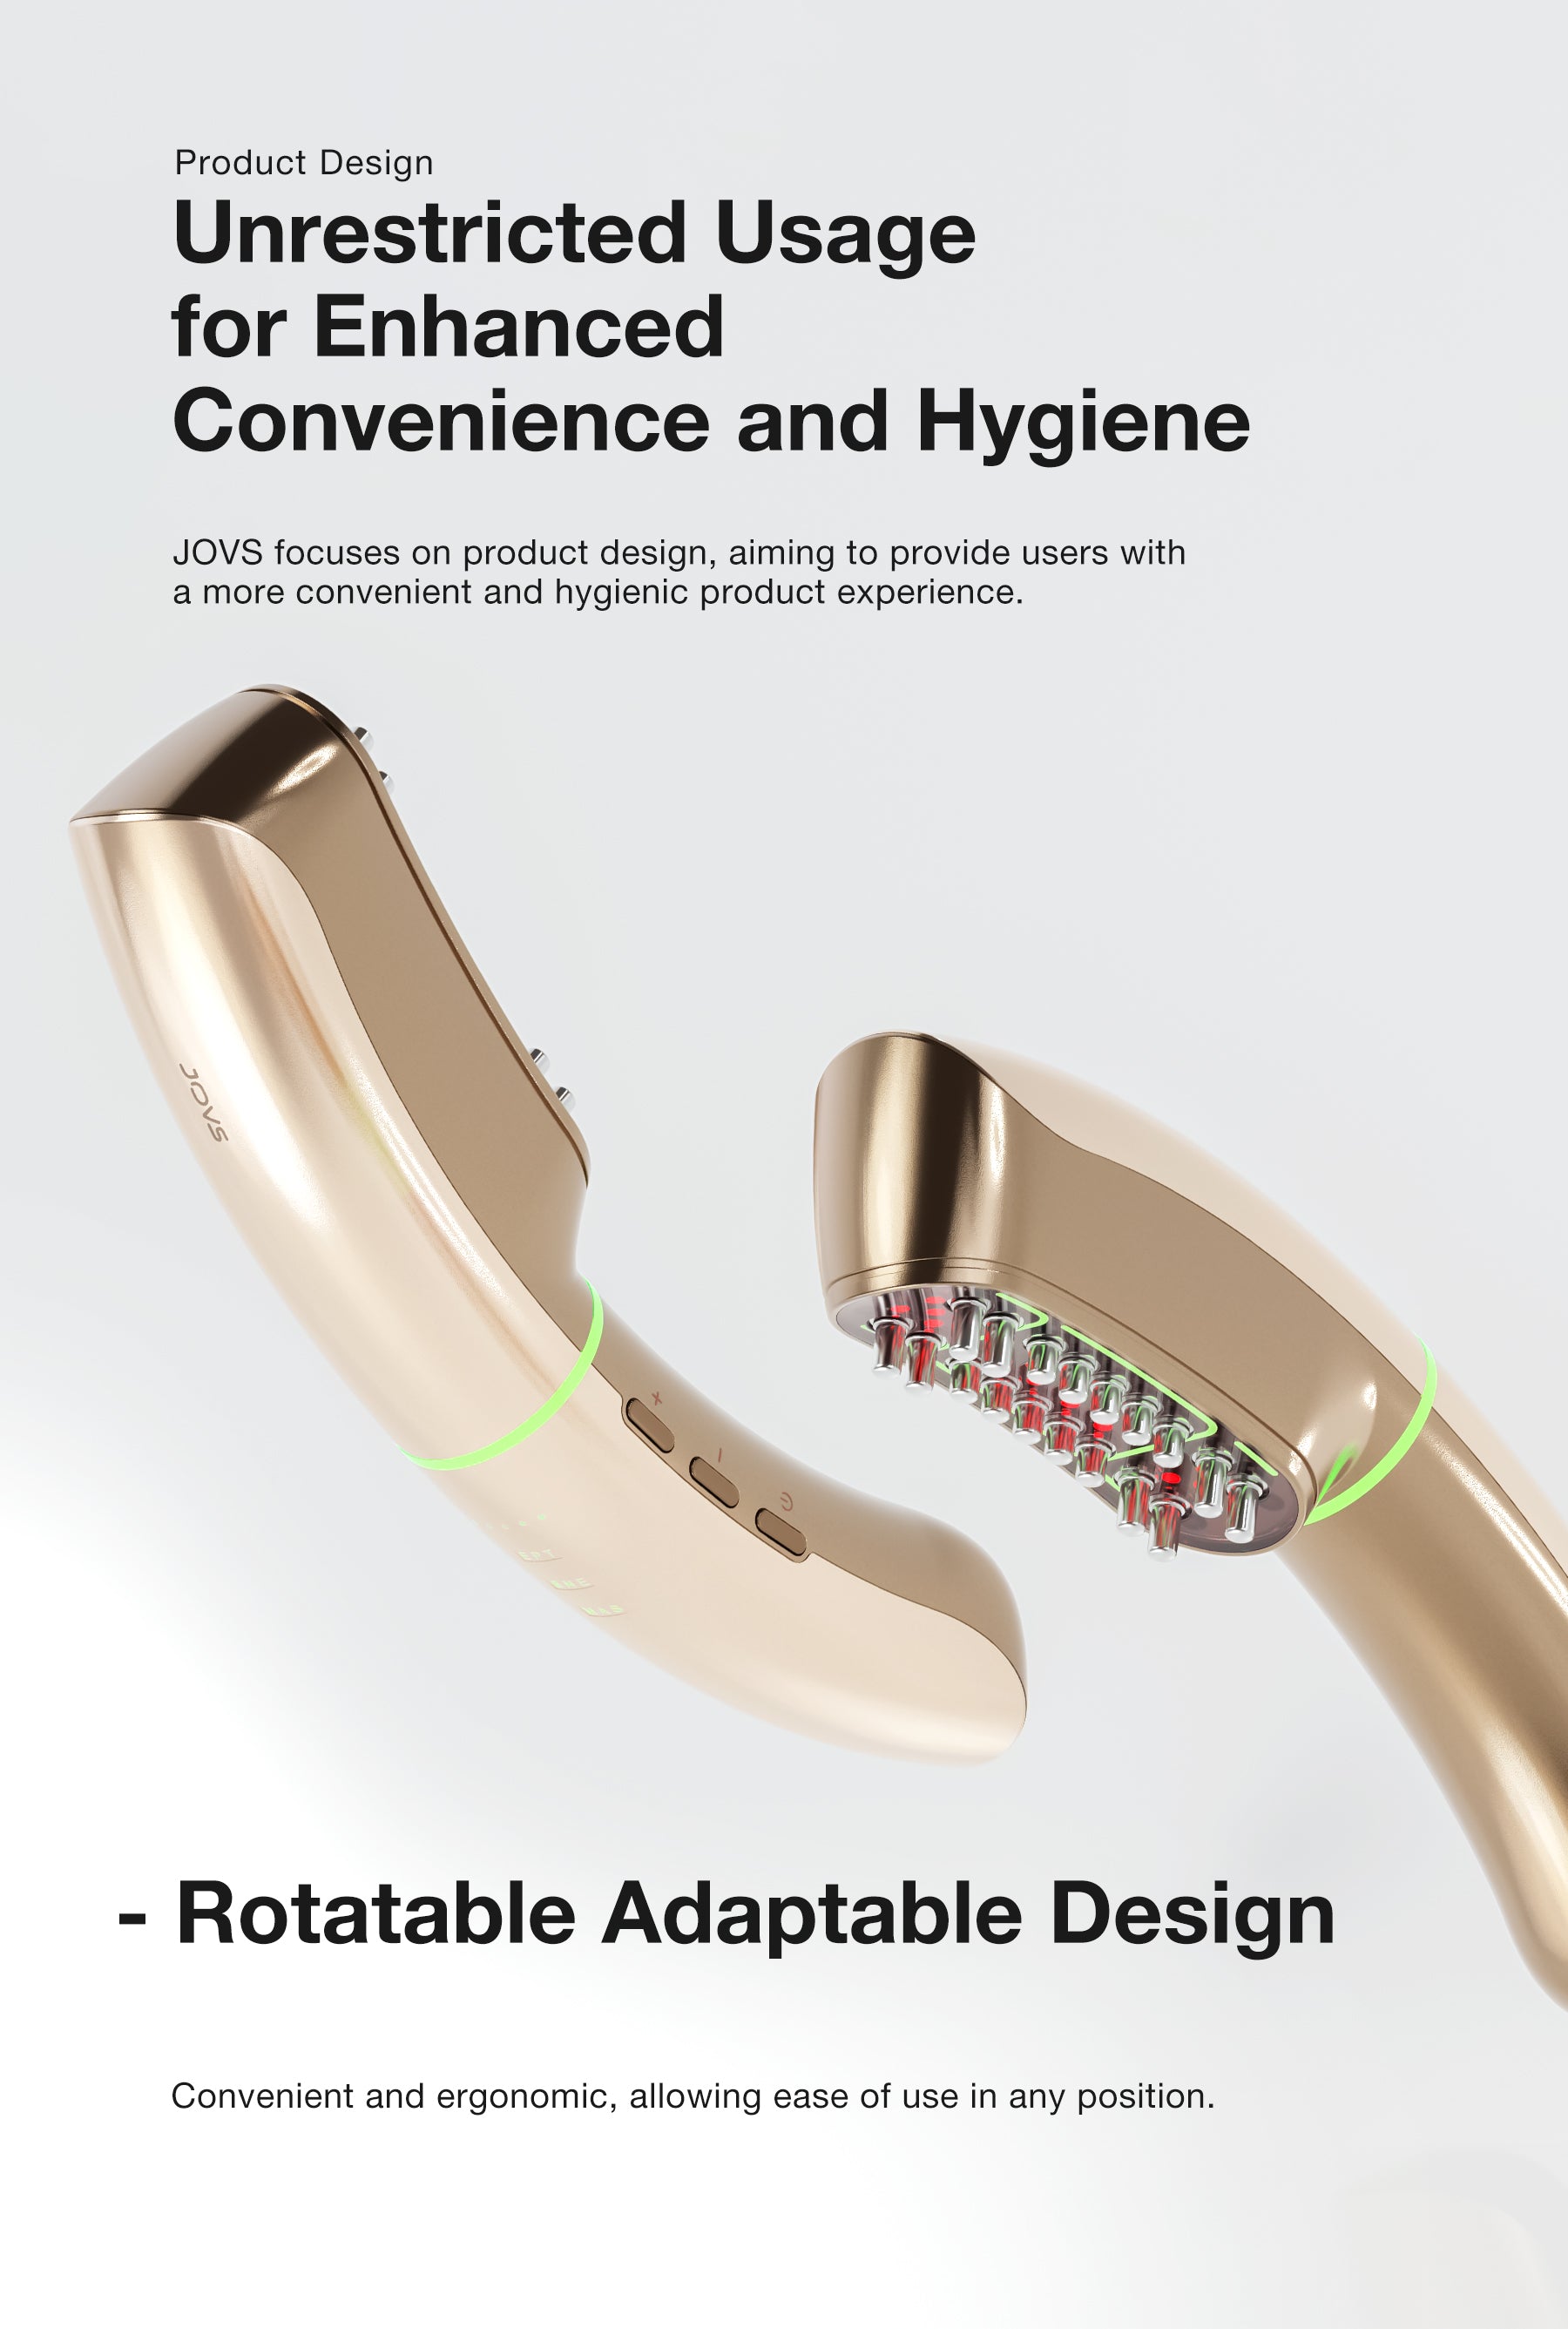 JOVS Slimax Microcurrent Anti-aging Device with ergonomic design for full-body convenience and hygiene.